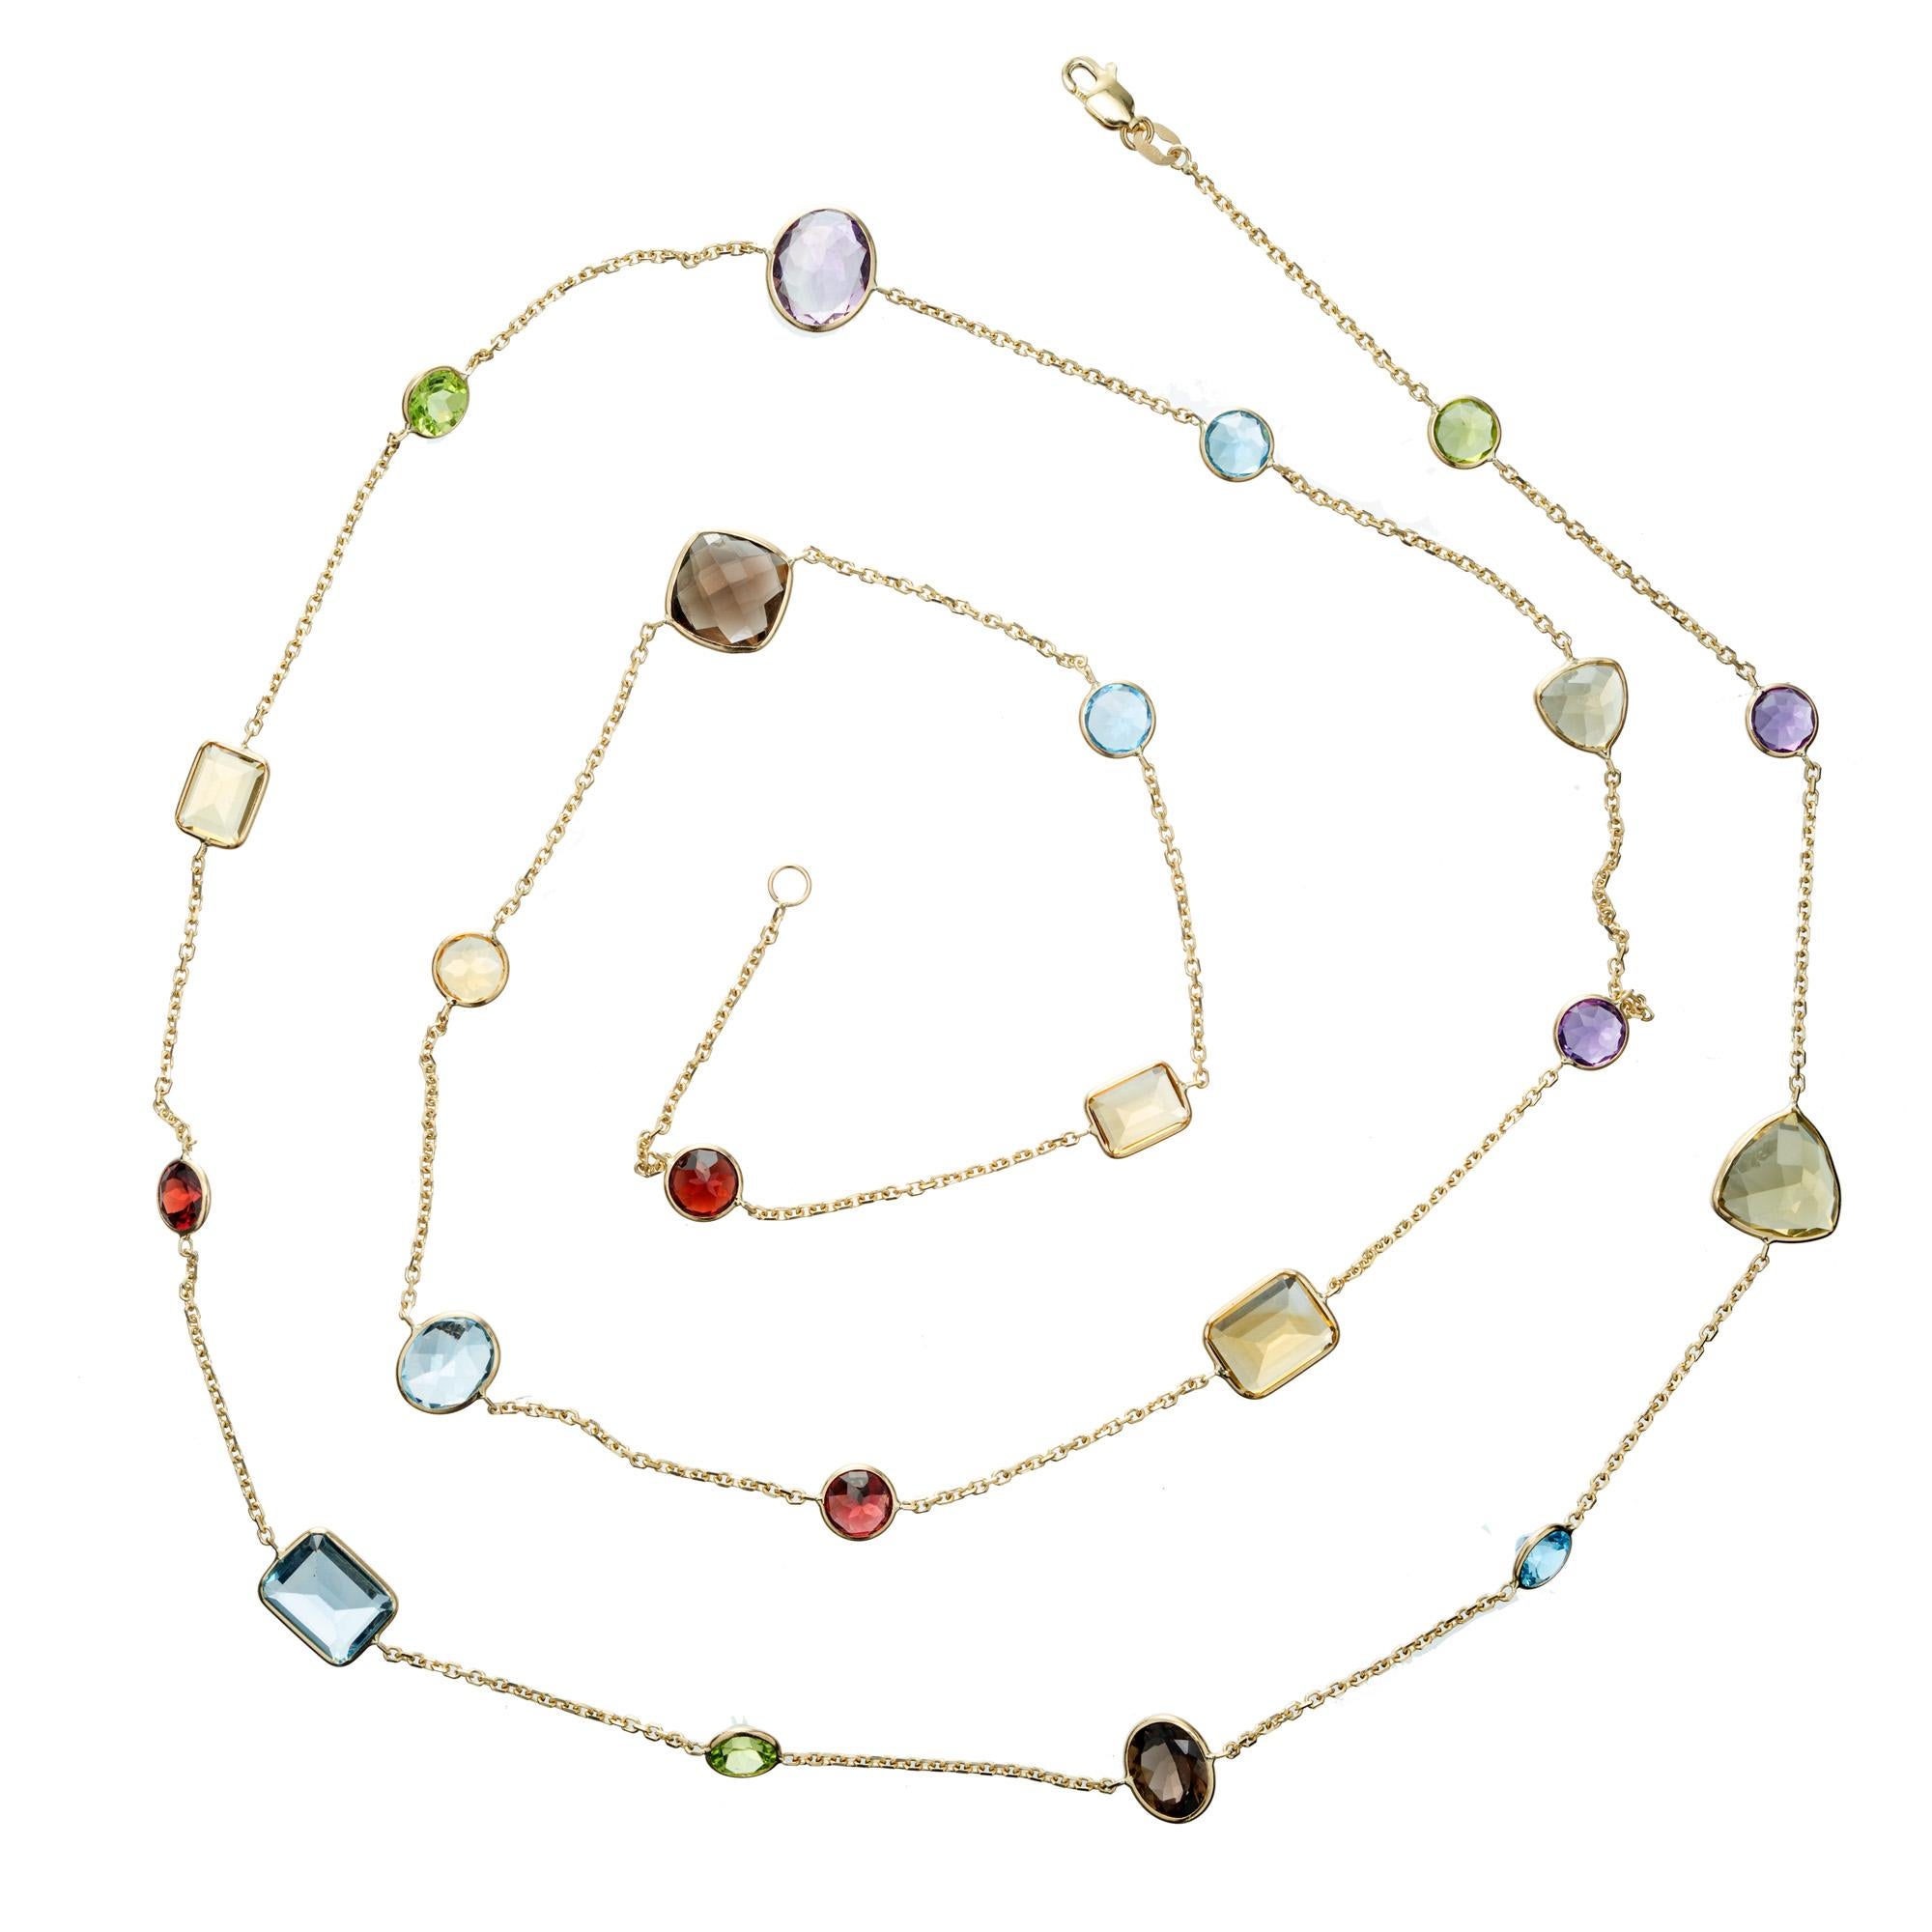 necklace with multiple stones